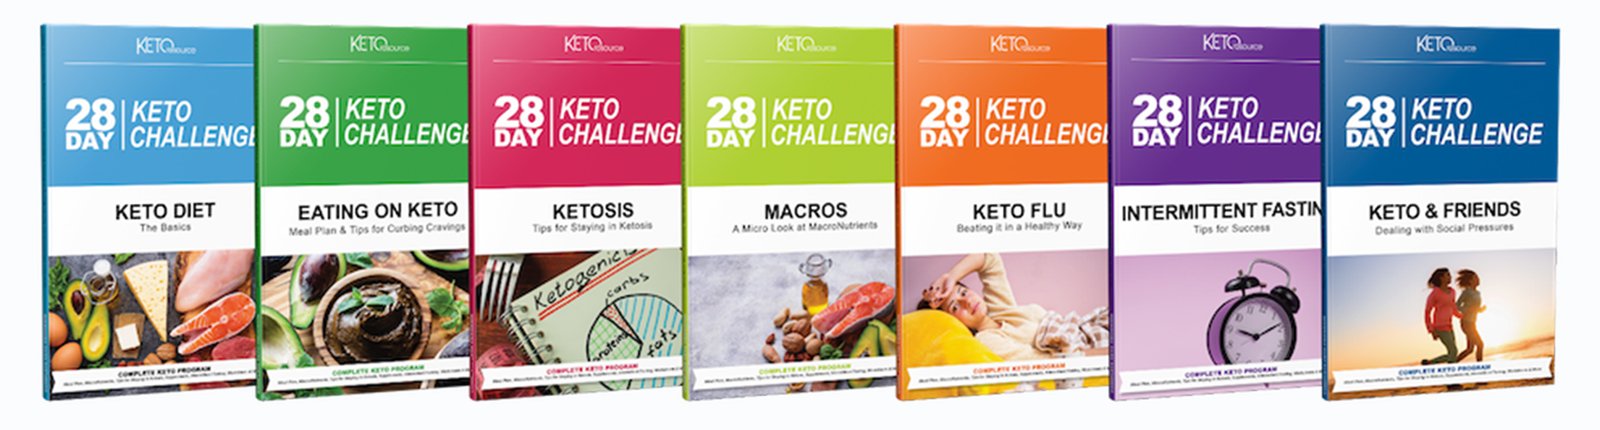 Keto-Resources-review